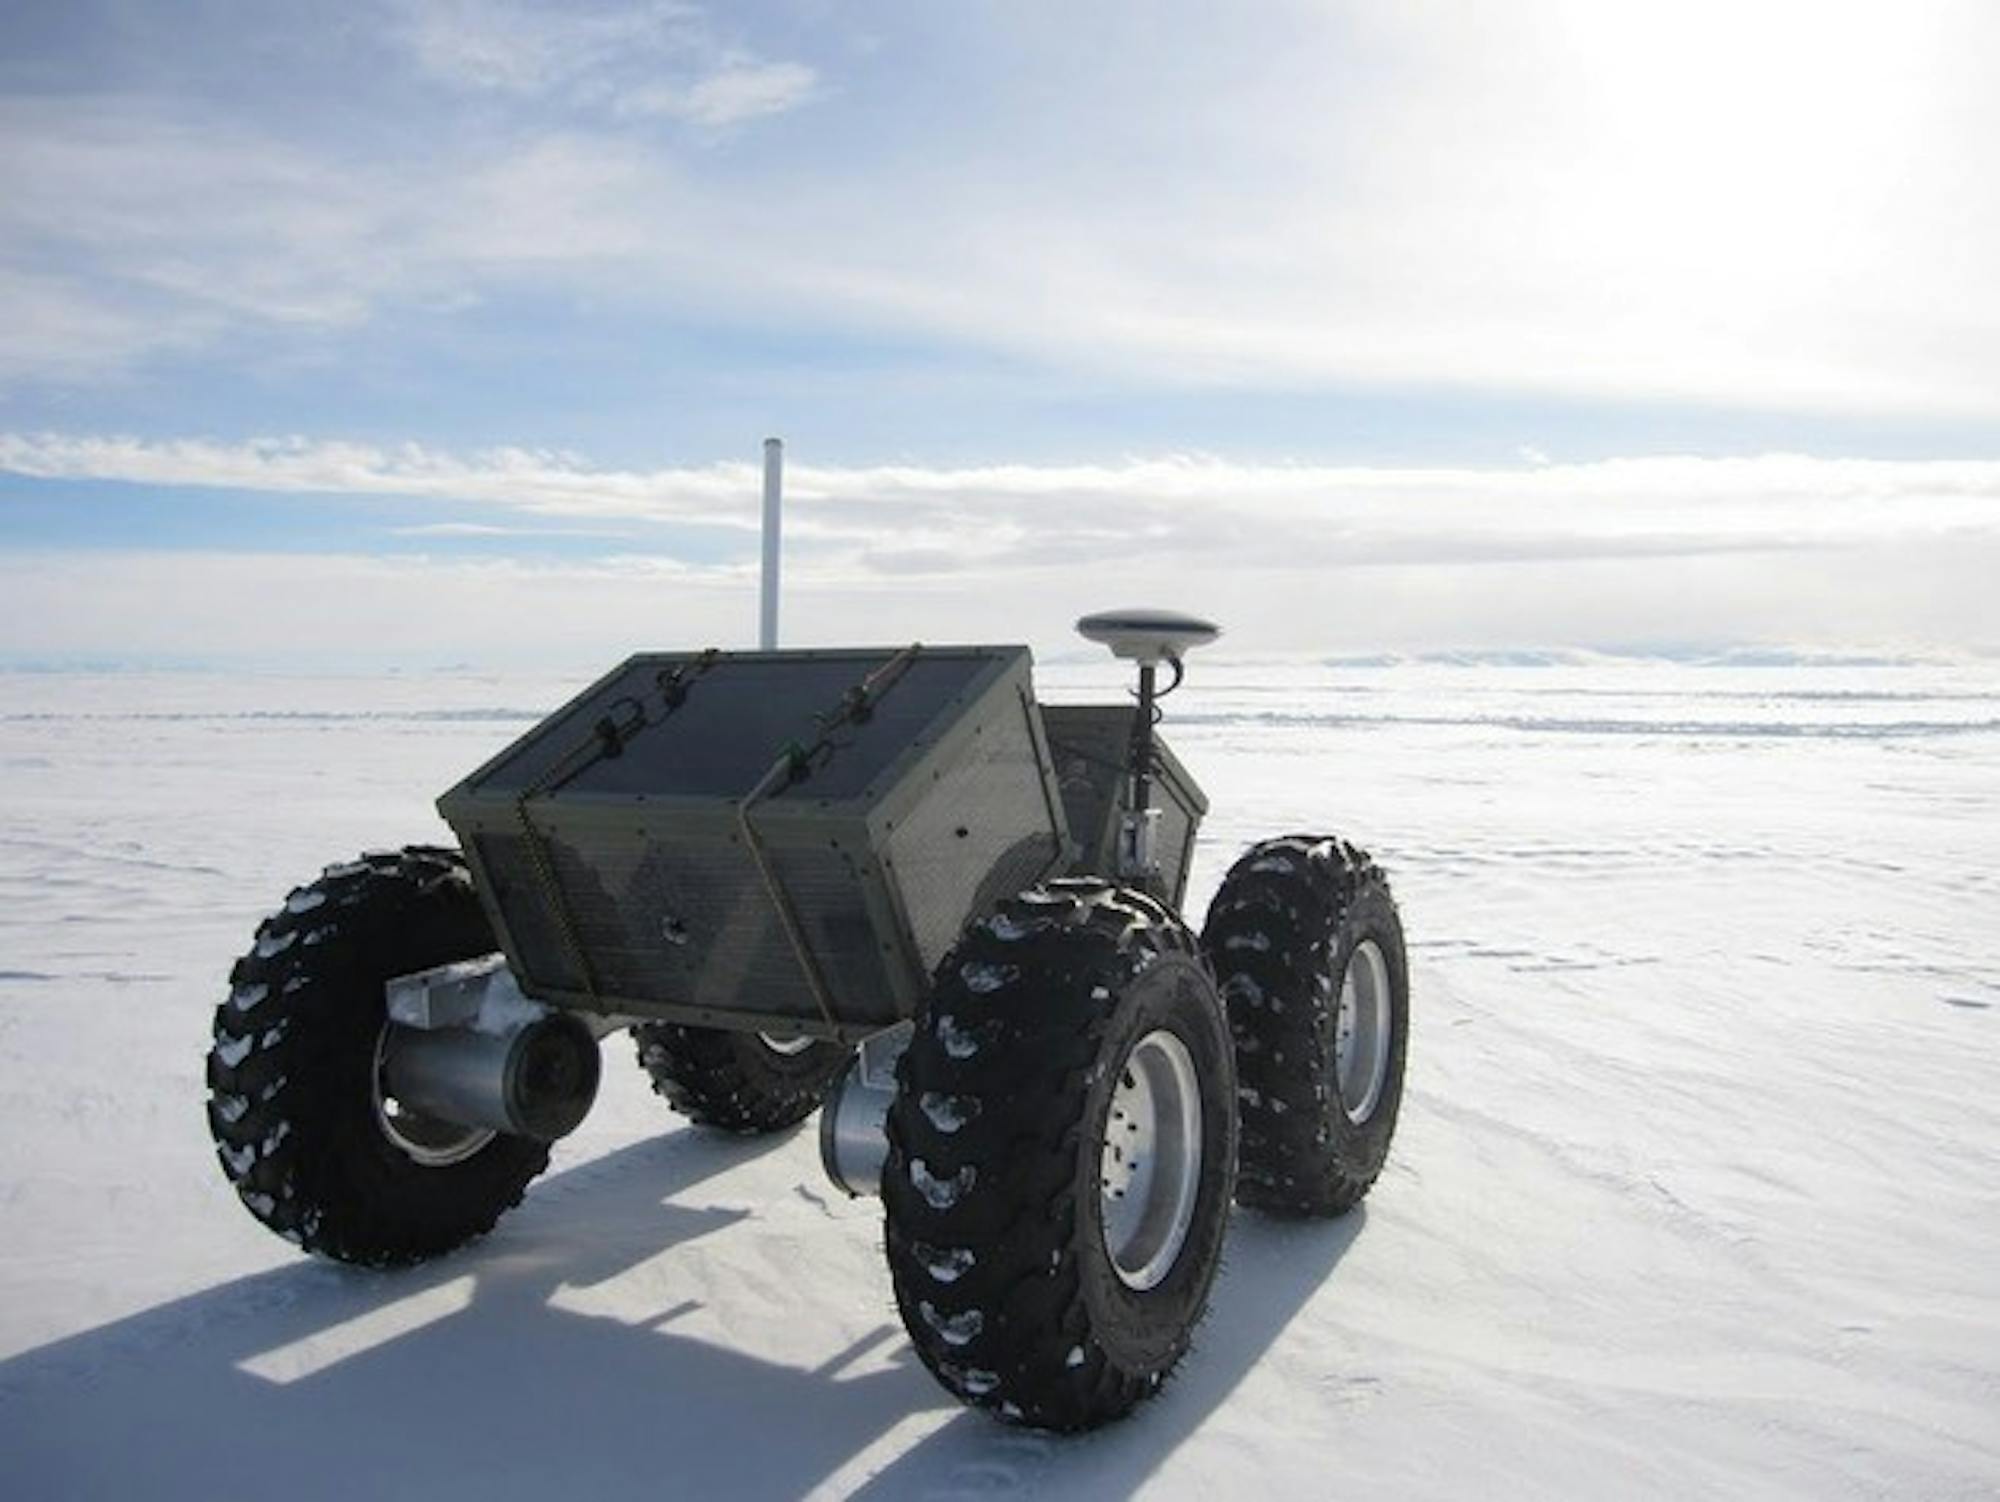 The Yeti robots's ground-penetrating radar will allow polar researchers to safely navigate crevass-filled ice caps.